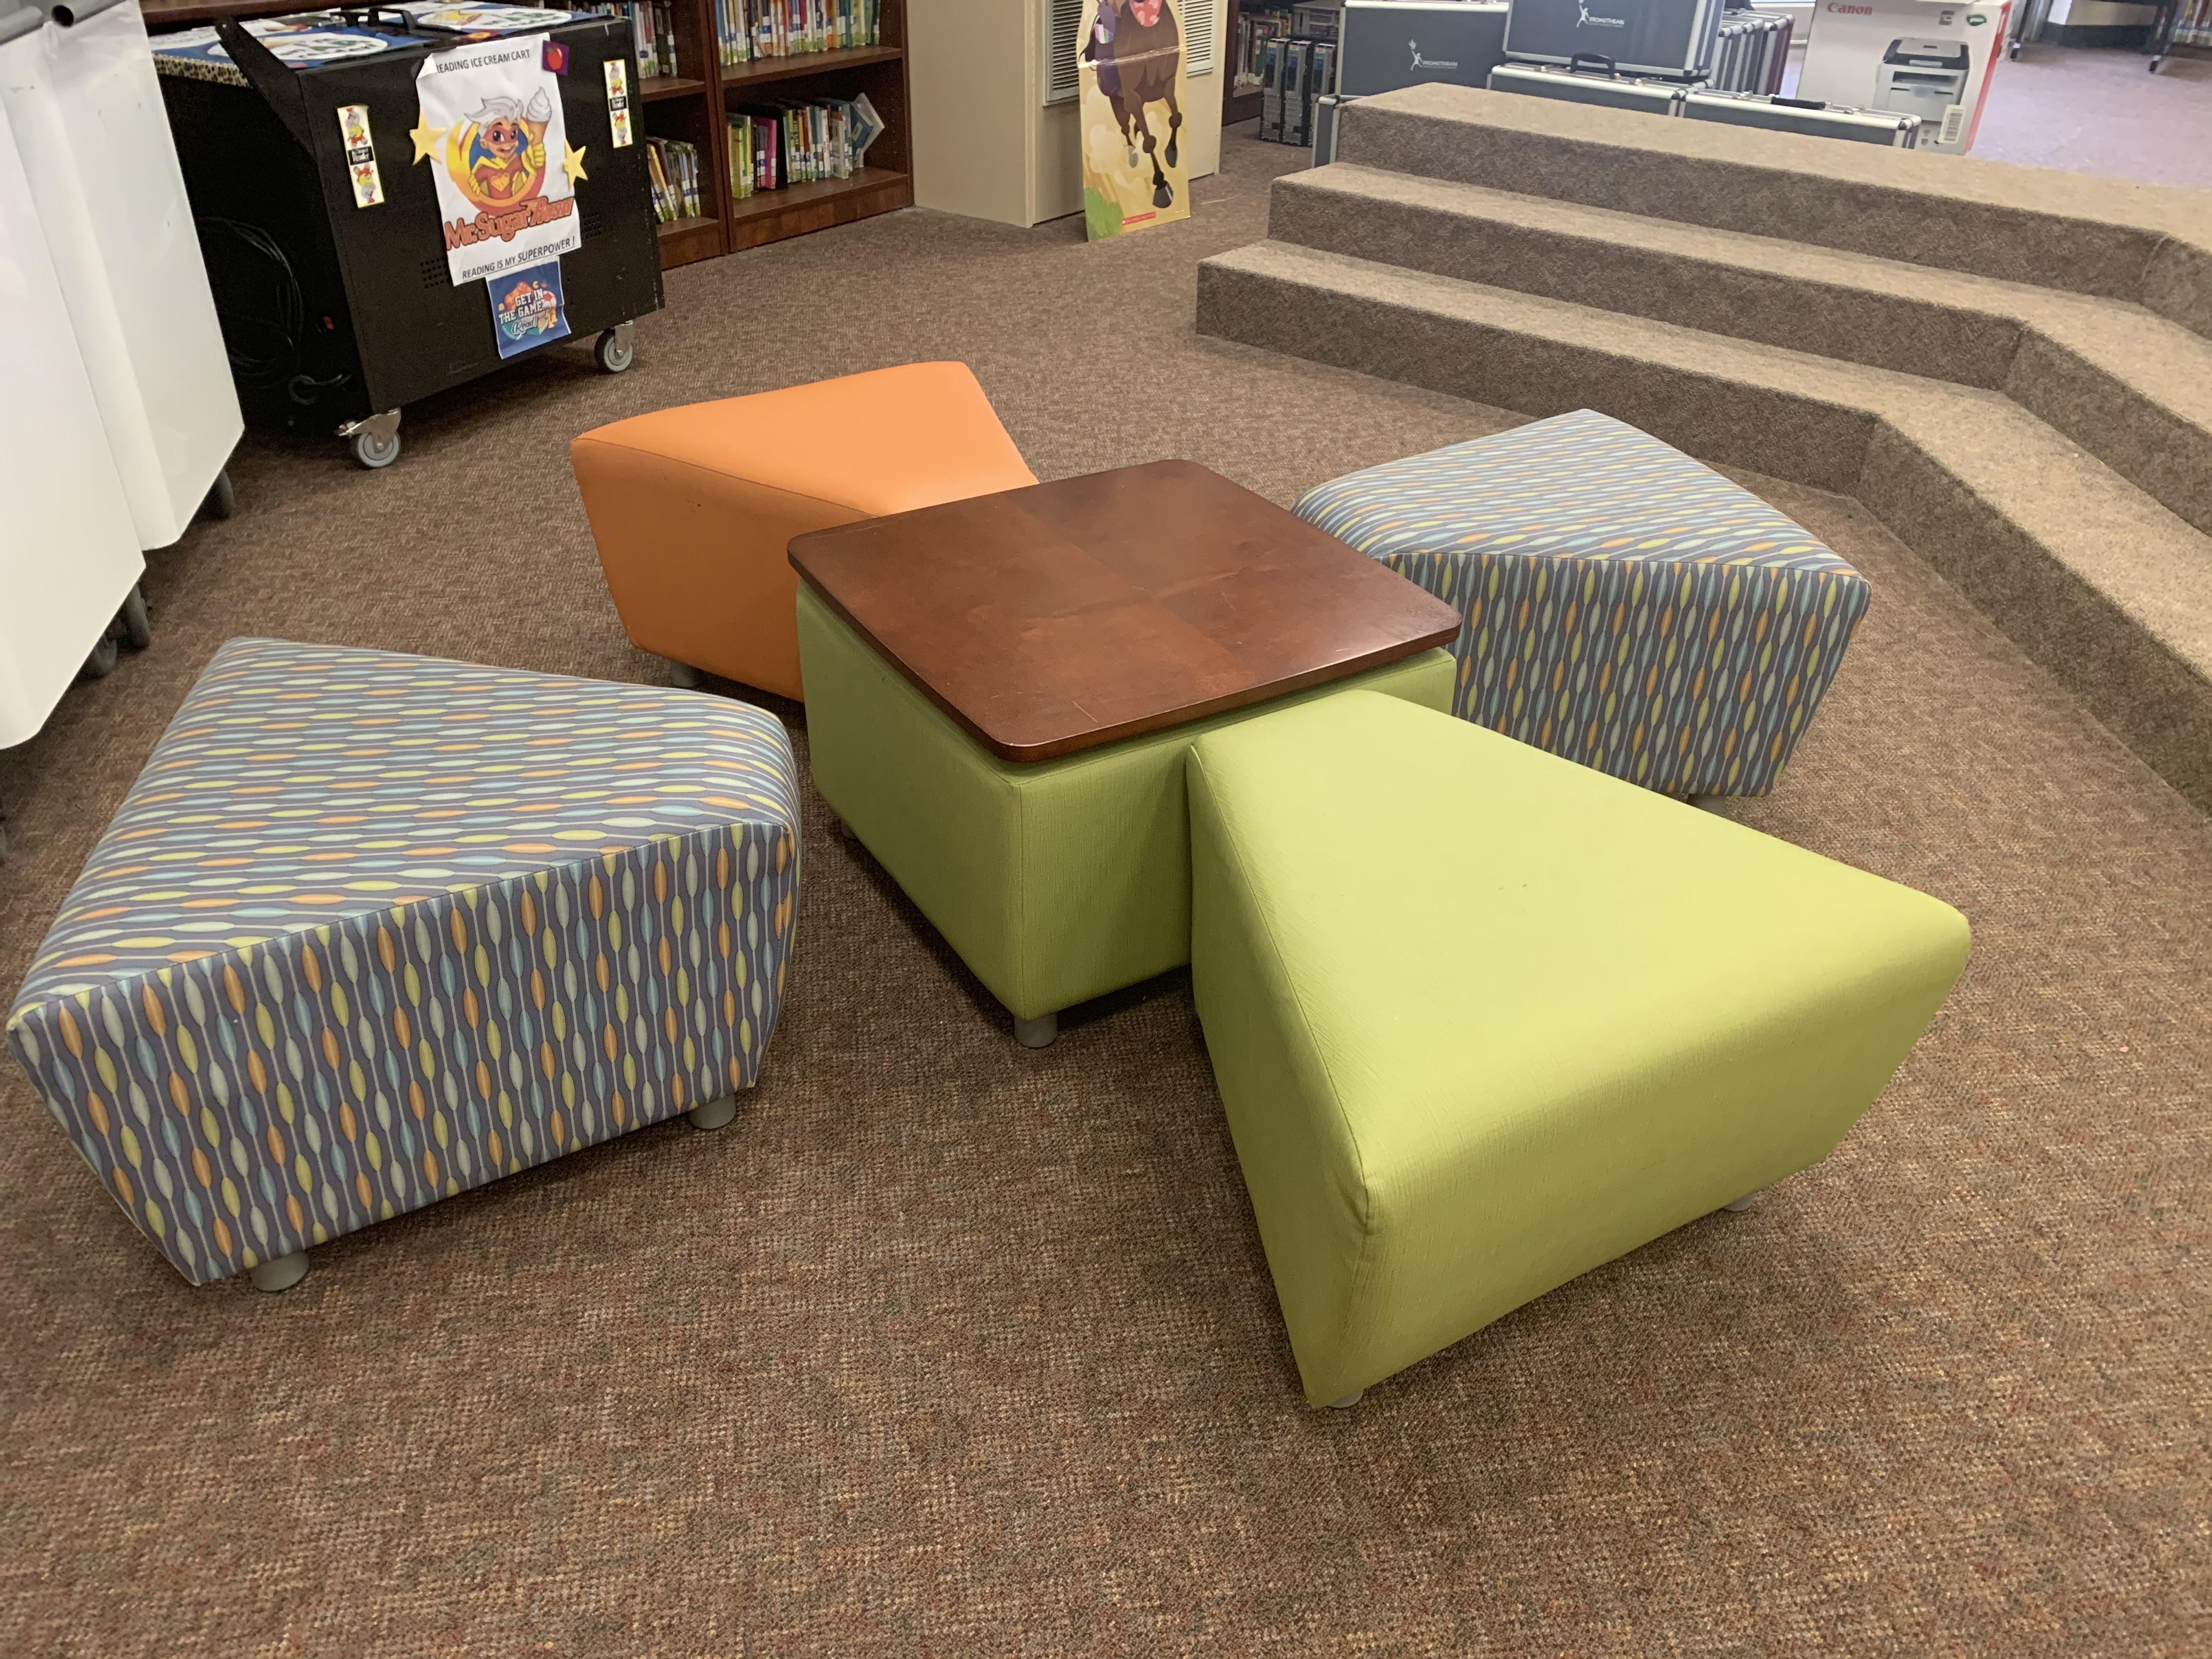 chairs in media center